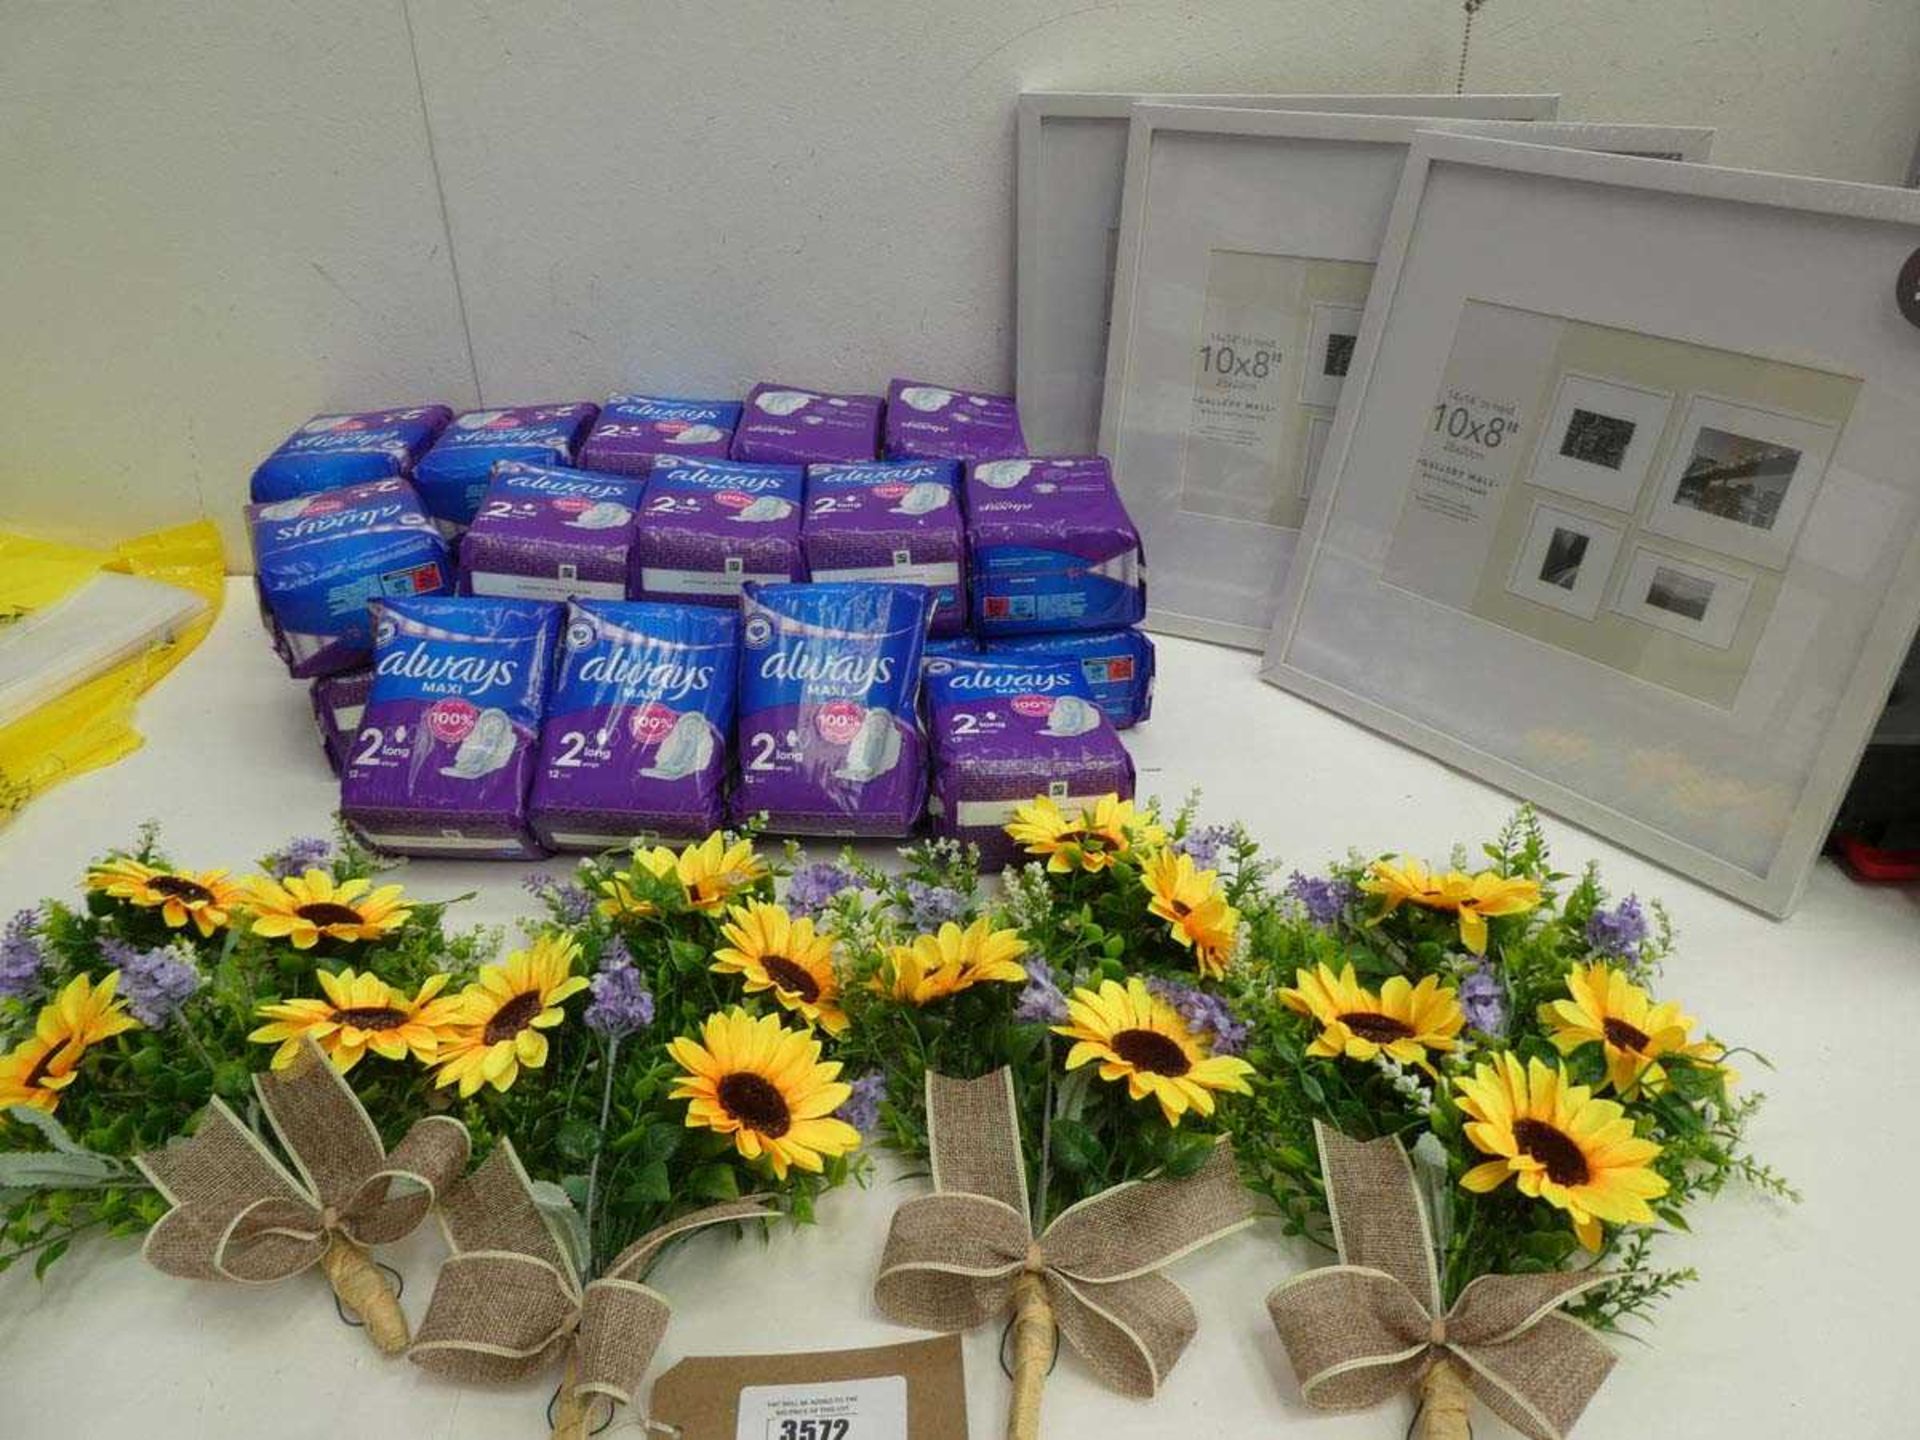 +VAT 24 packs of Always Maxi pads, 4 artificial flower bouquets and 3 10"x 8" picture frames